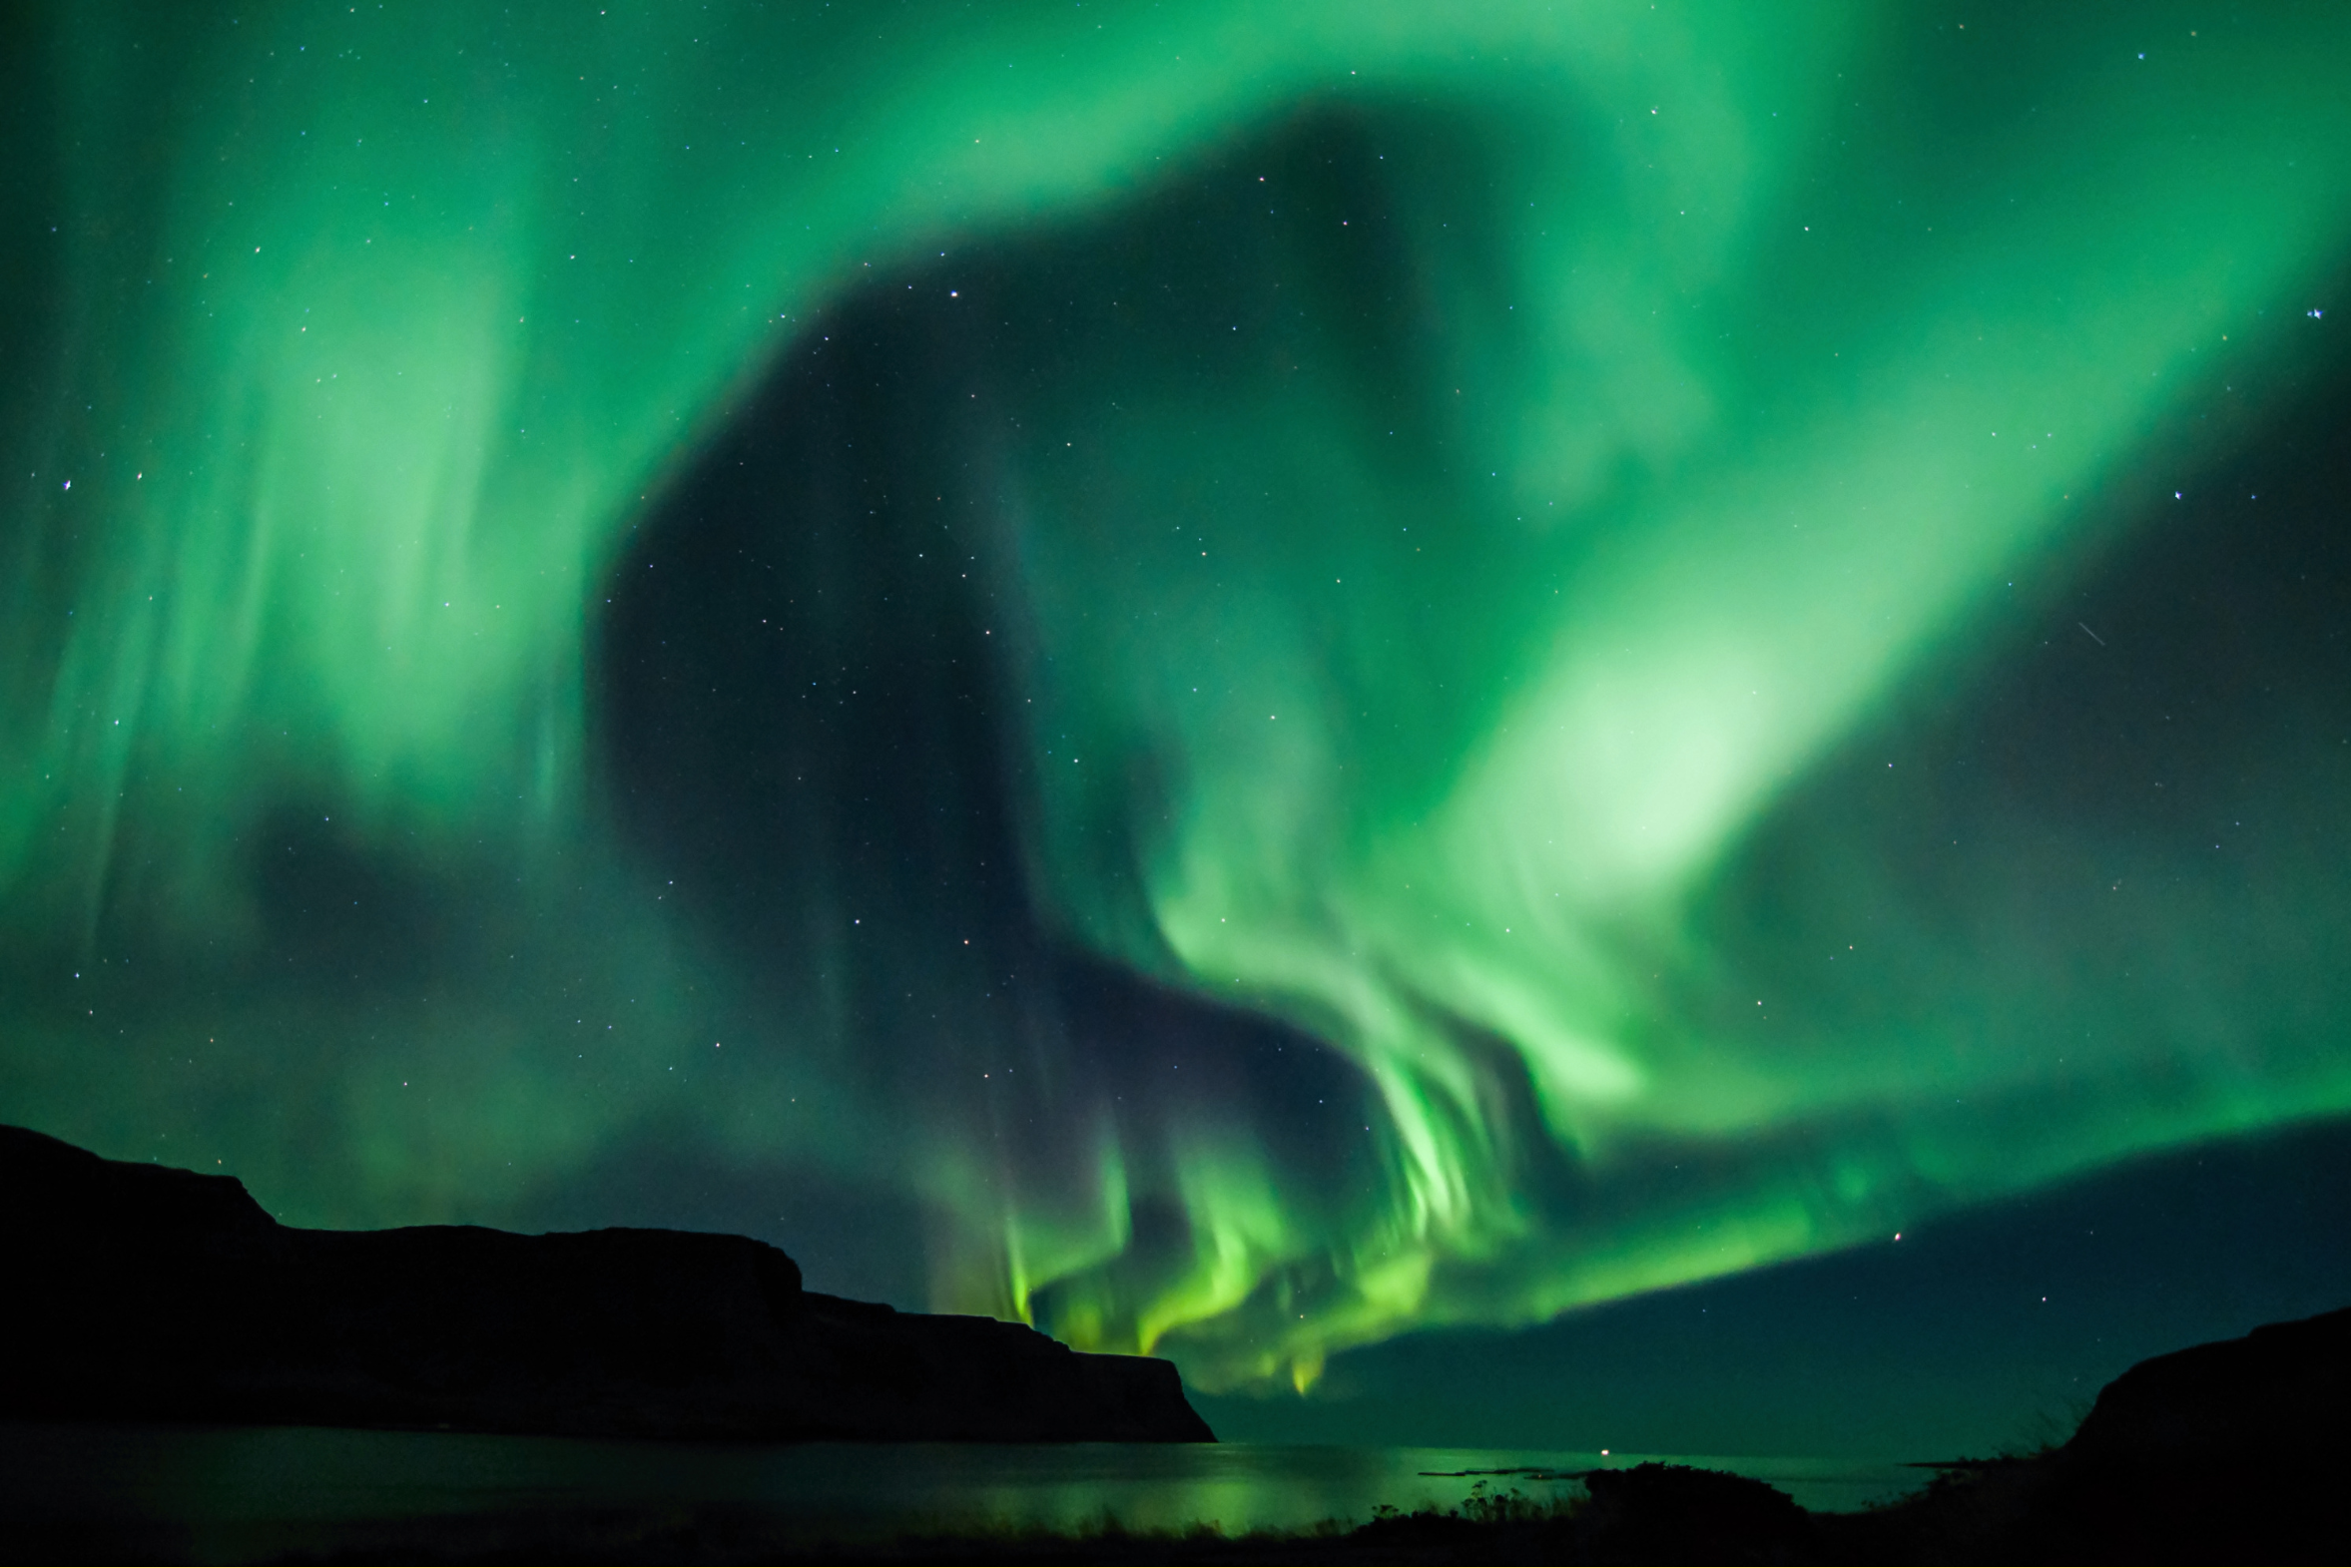 Get ready to view the Northern Lights from your hot tub!